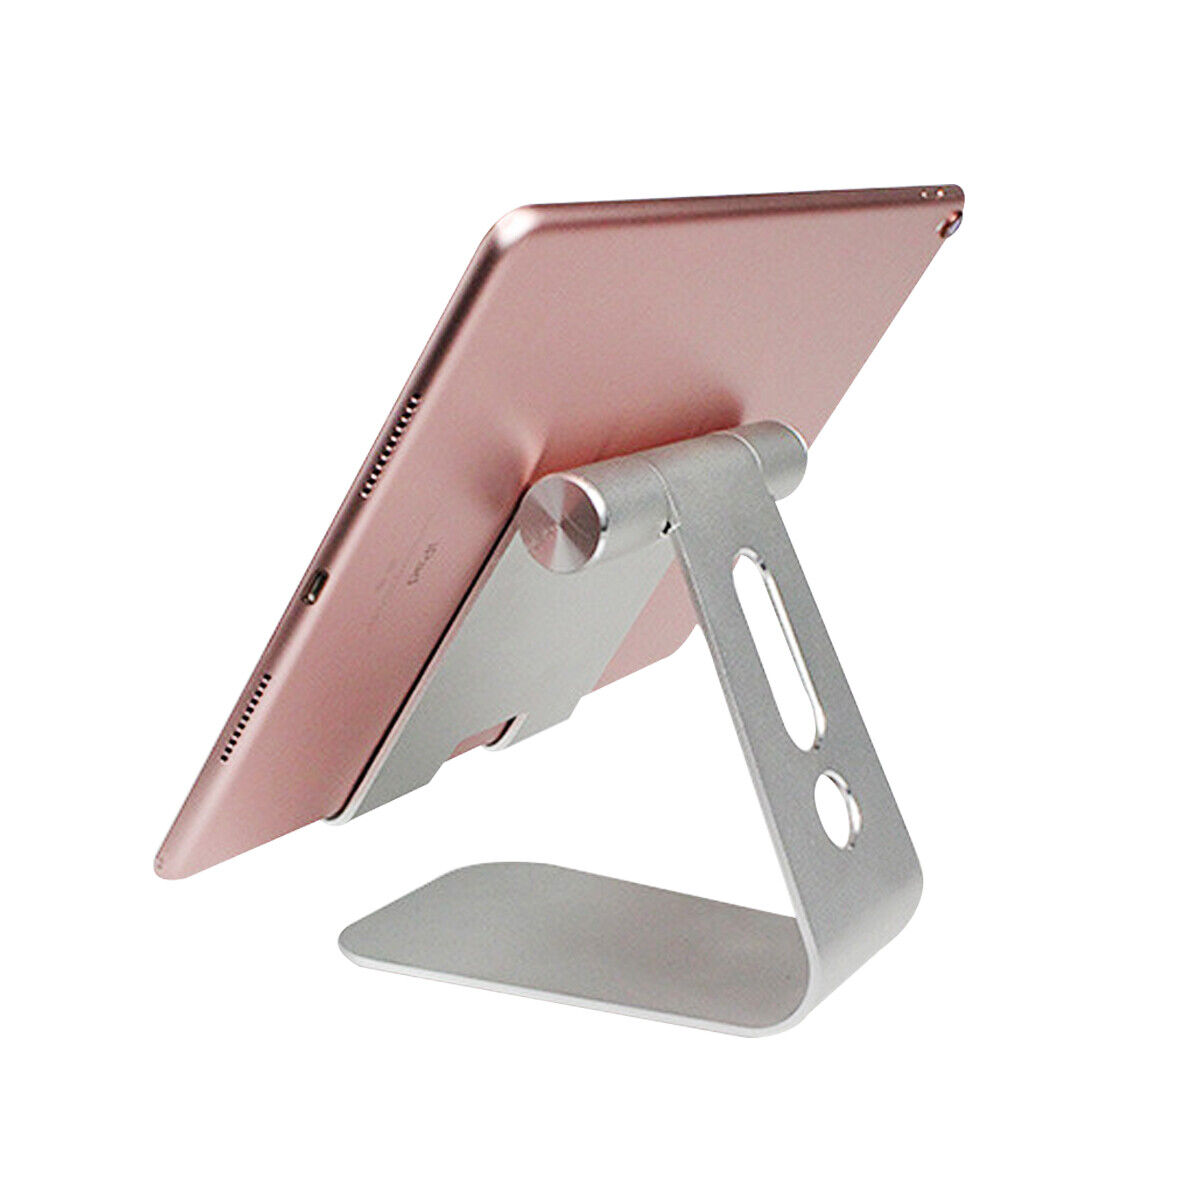 Aluminum Alloy Holder Stand Tablet Support Portable for iPhone iPad 9.7 Air Pro